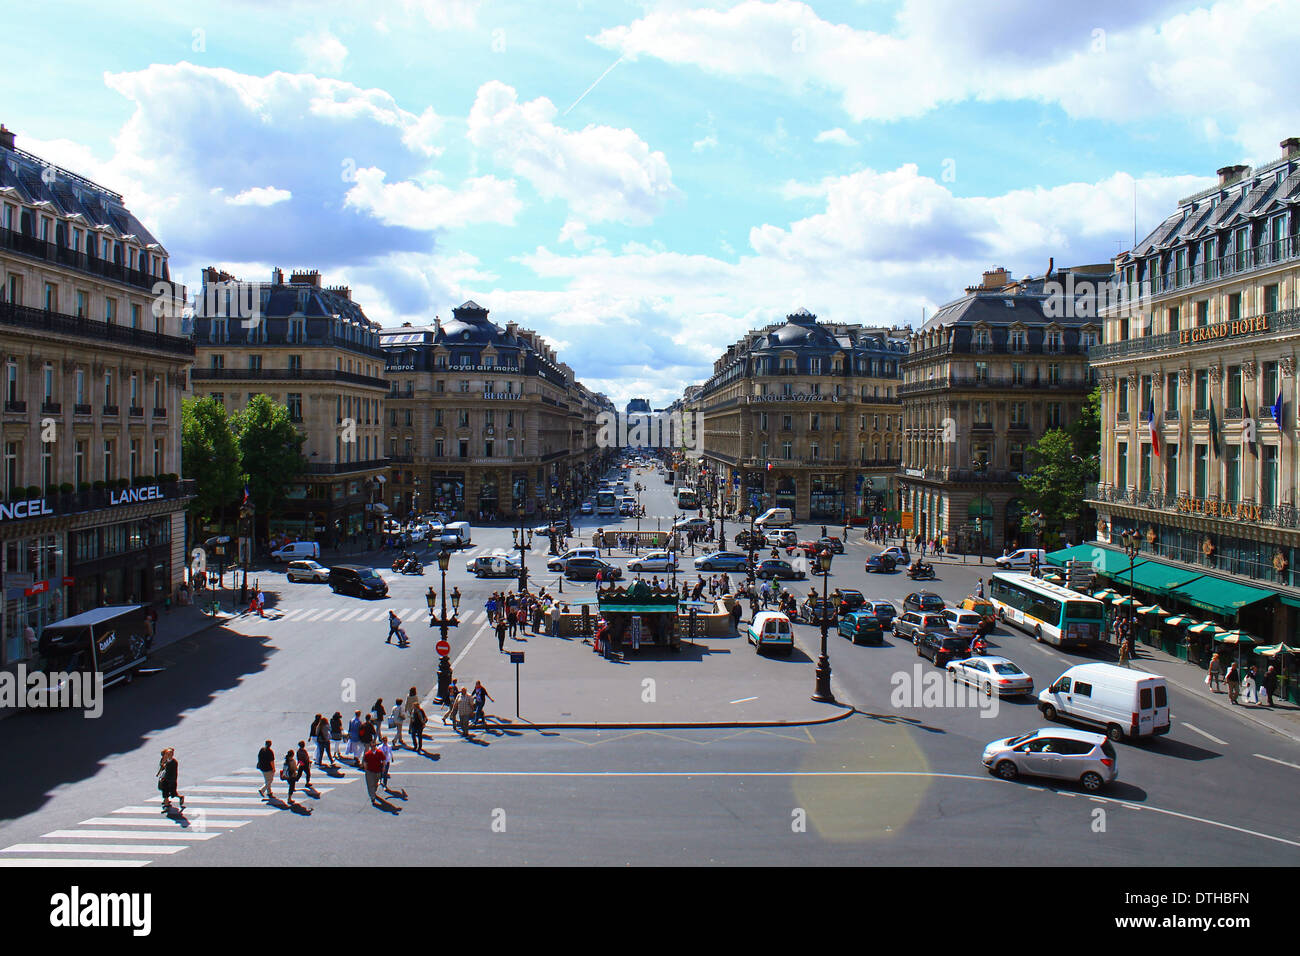 A view from the balcony of the Royal Opera House (Palais Garnier) in Paris, France. Stock Photo